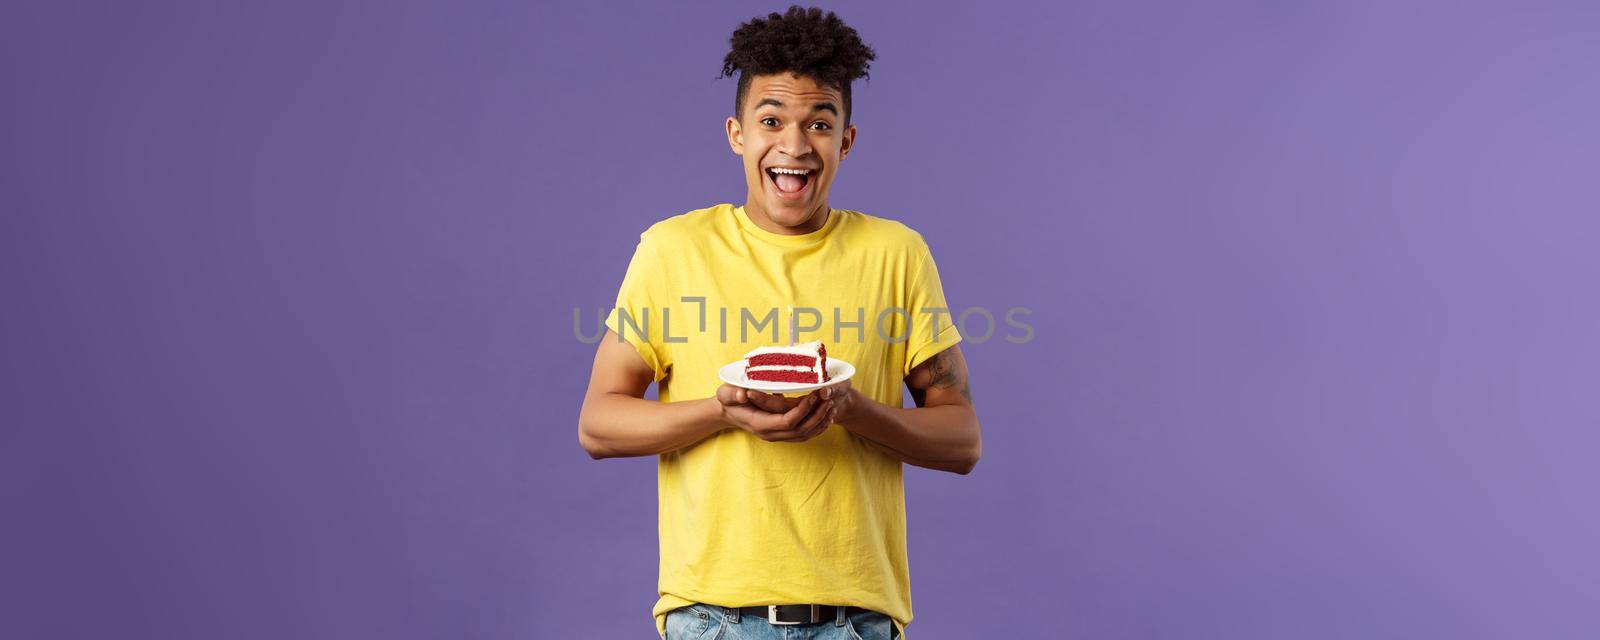 Happy birthday to me. Portrait of upbeat, excited hispanic man with dreads celebrating b-day, holding plate cake with lit candle, smiling amused, making wish, purple background by Benzoix